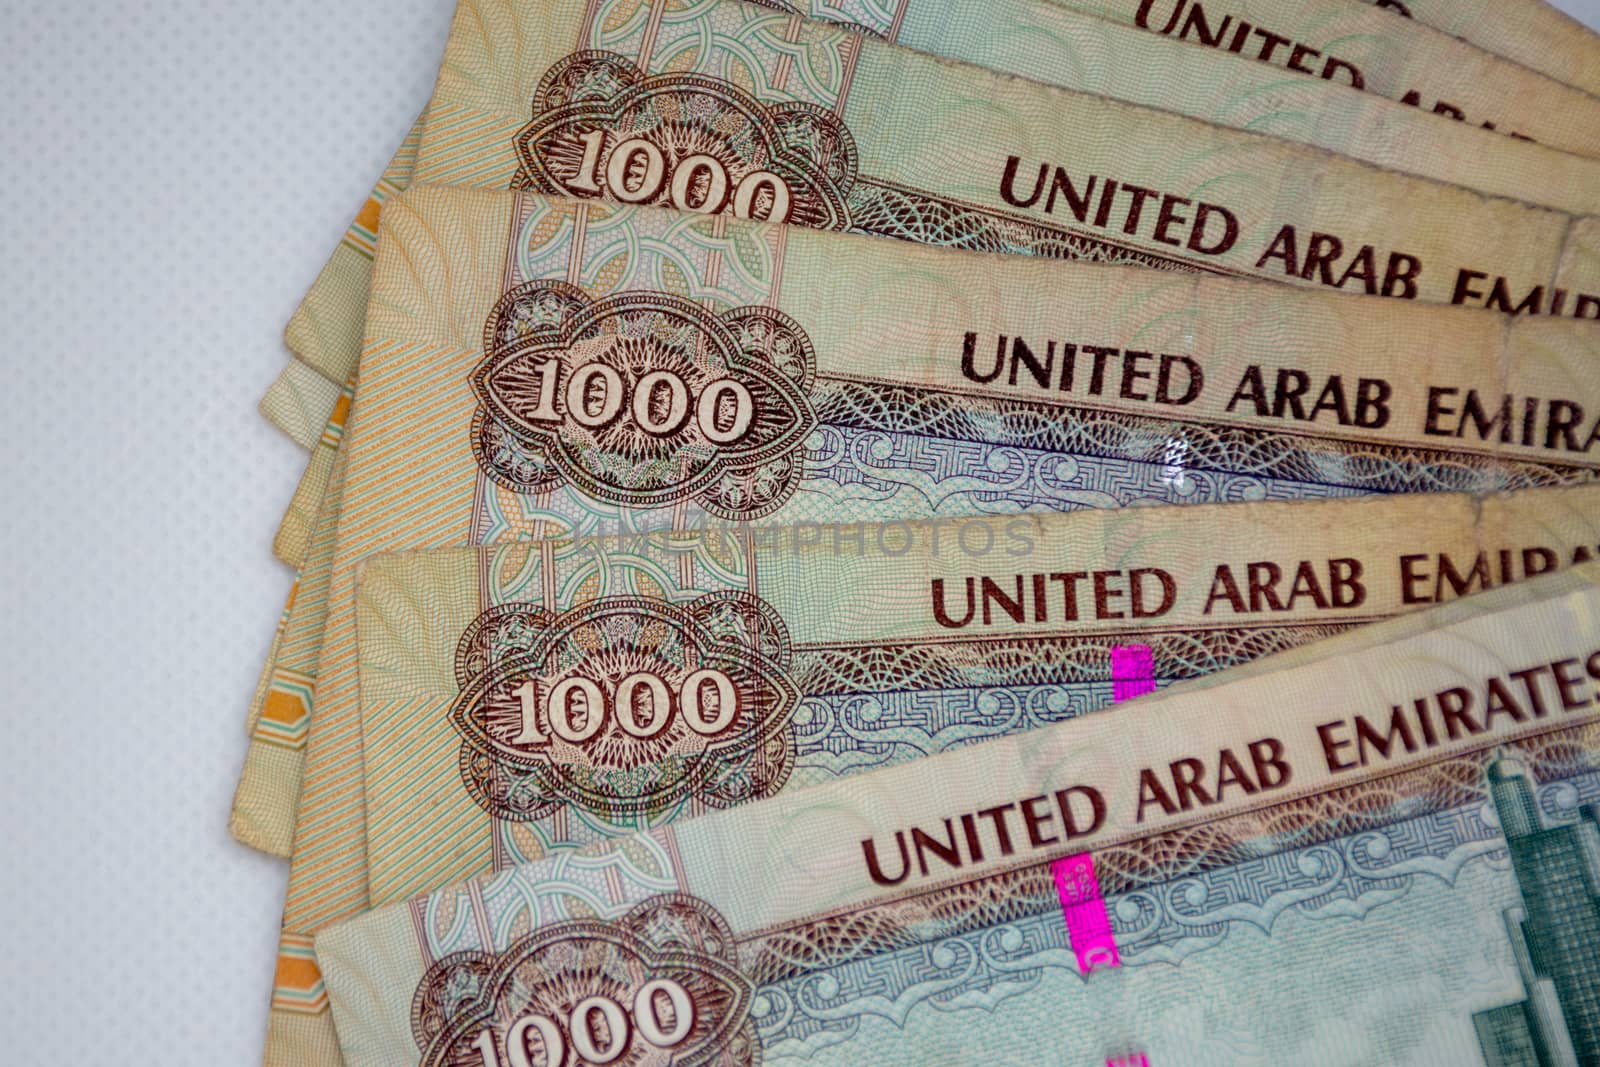 The Currency of the United Arab Emirates (UAE) - Thousand Dirham by kingmaphotos